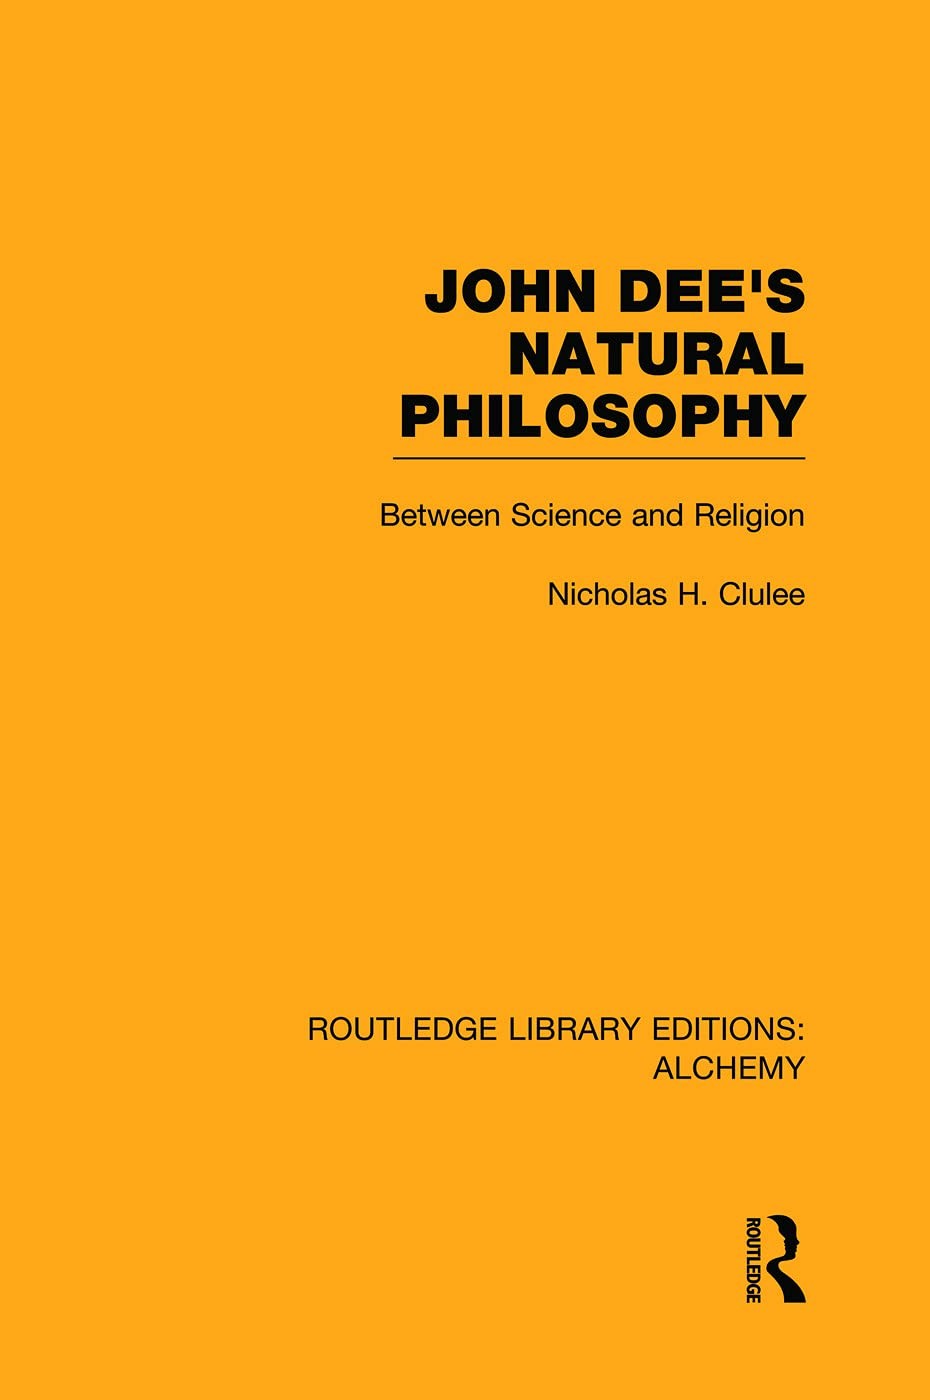 John Dee's Natural Philosophy: Between Science and Religion